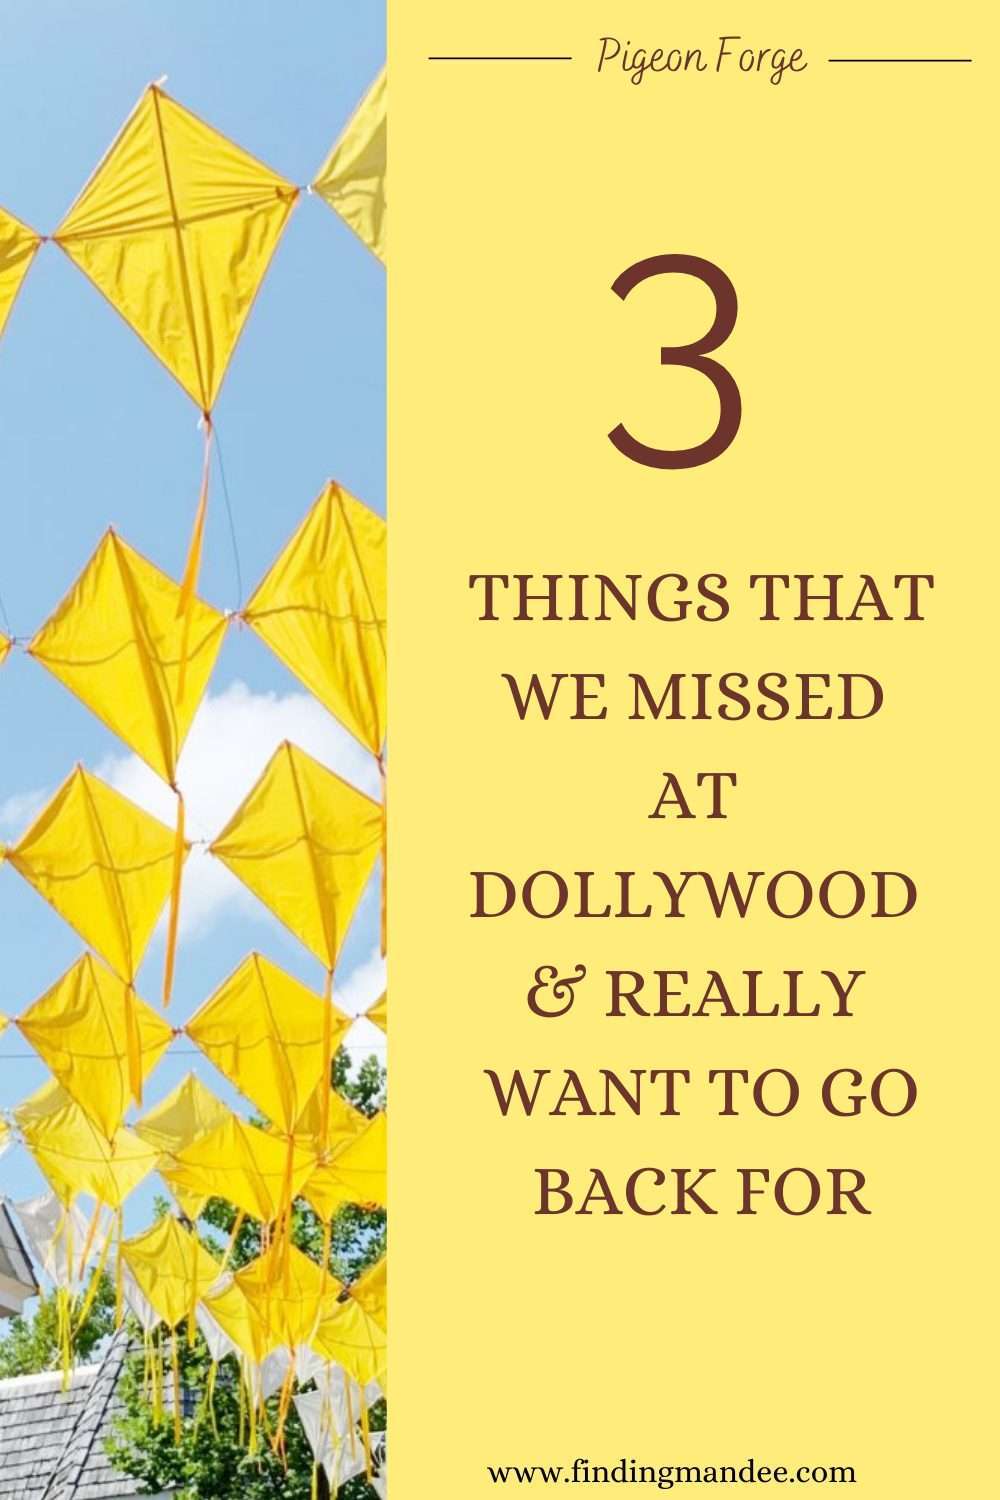 3 Things We Missed at Dollywood and Really Want to Go Back For | Finding Mandee